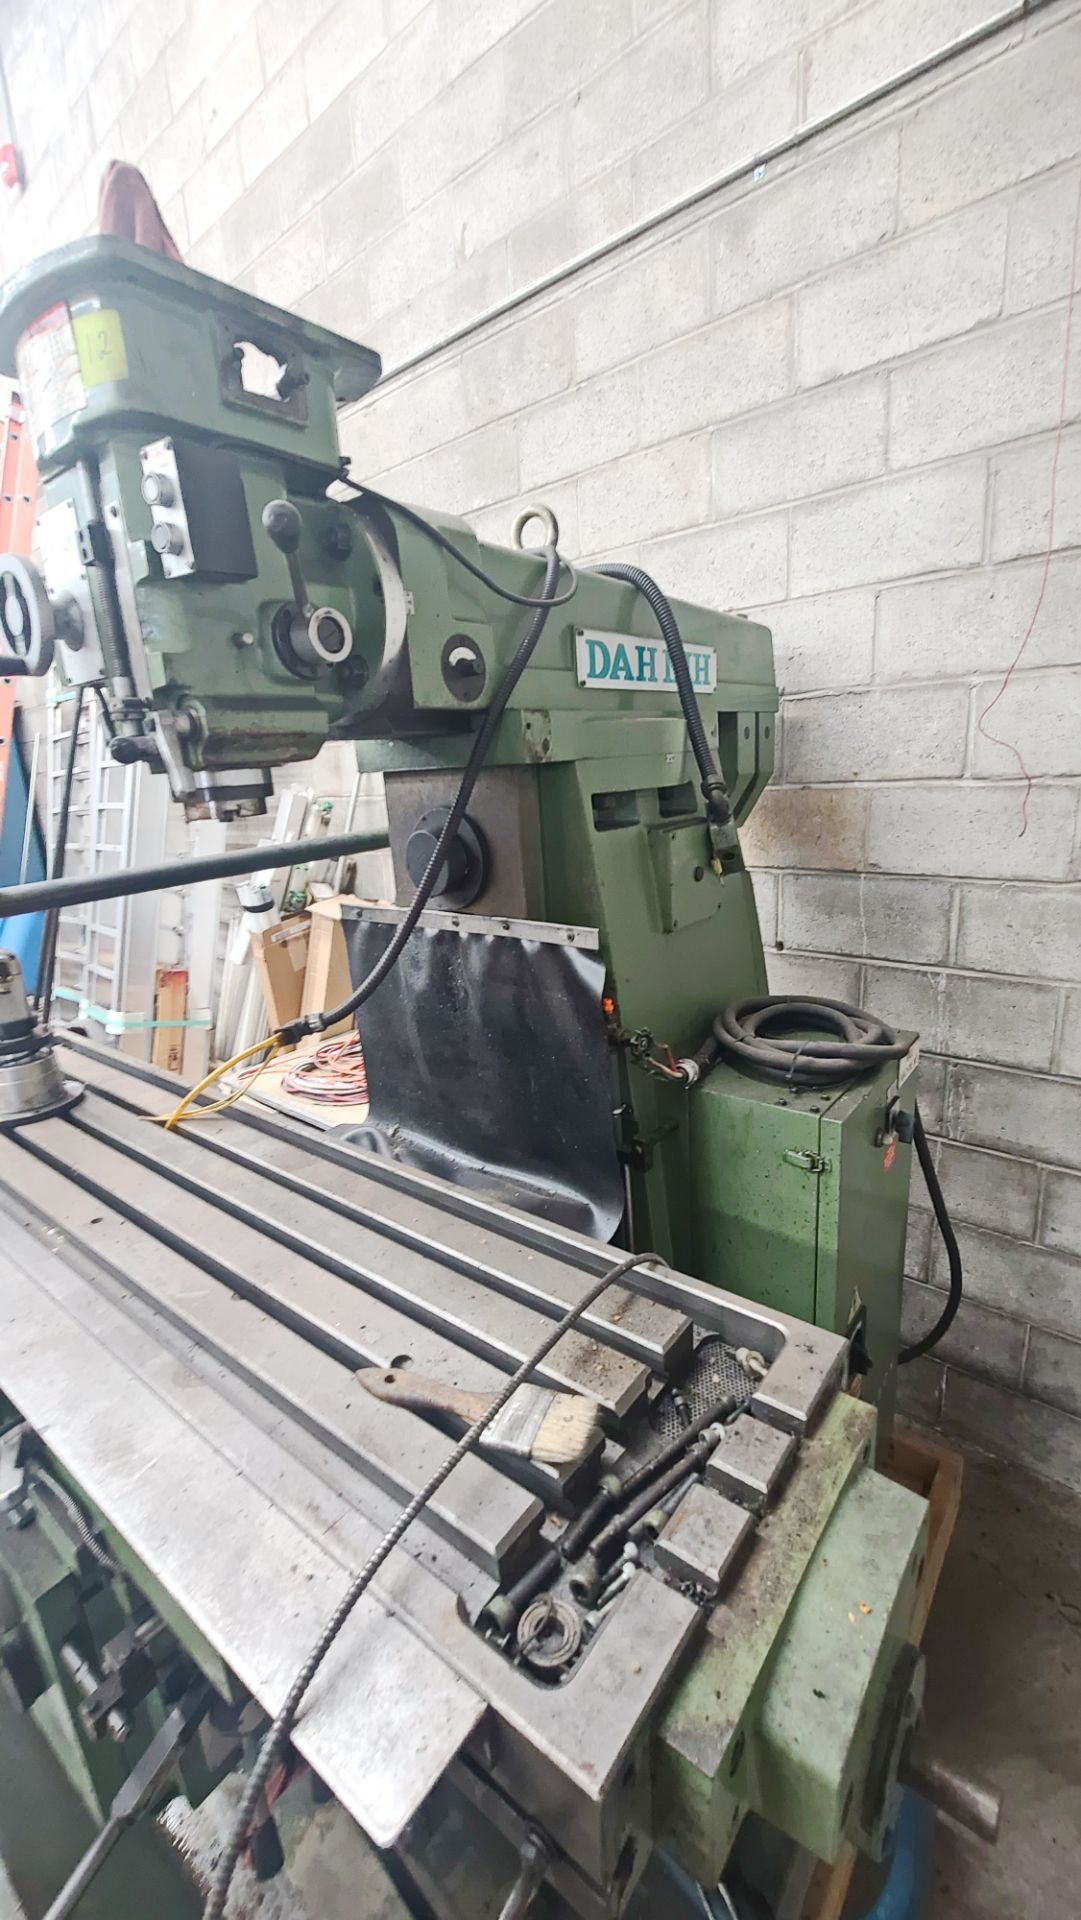 Dah-Lih DL GH950 Vertical/Horizontal Milling Machine, Adjustable Automatic Feeds, Centralized - Image 9 of 14